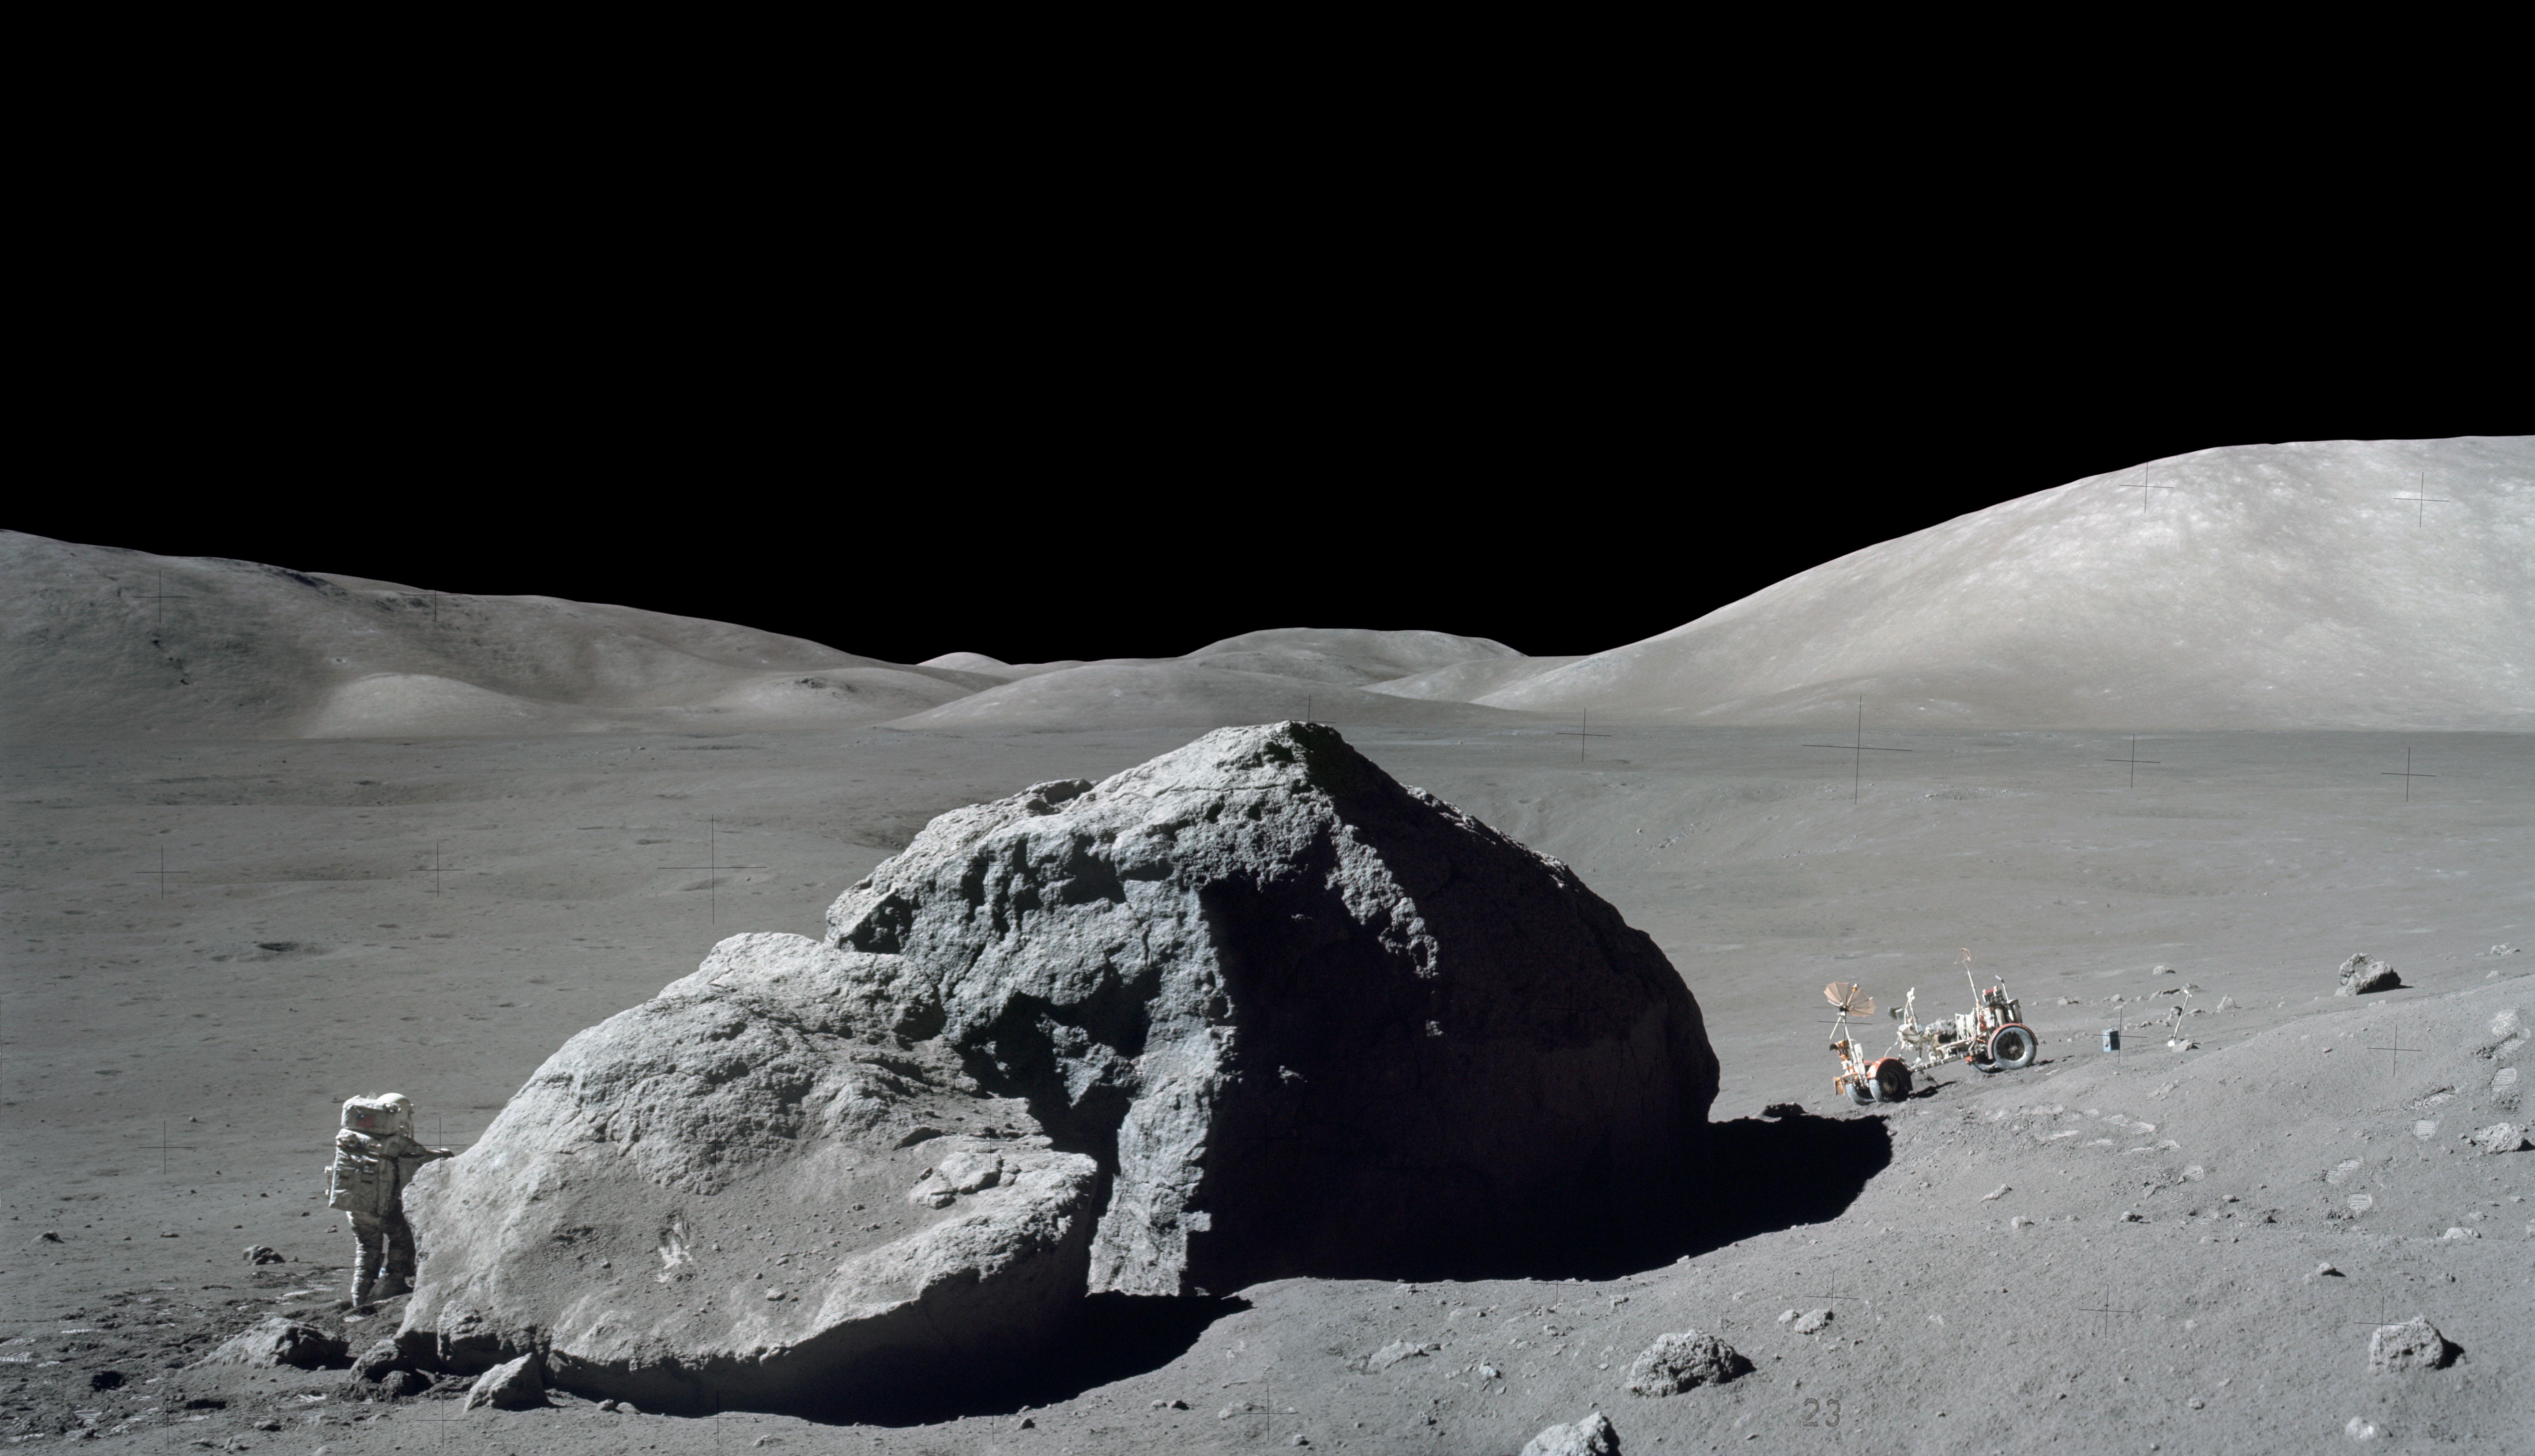 Astronaut and rover on the Moon